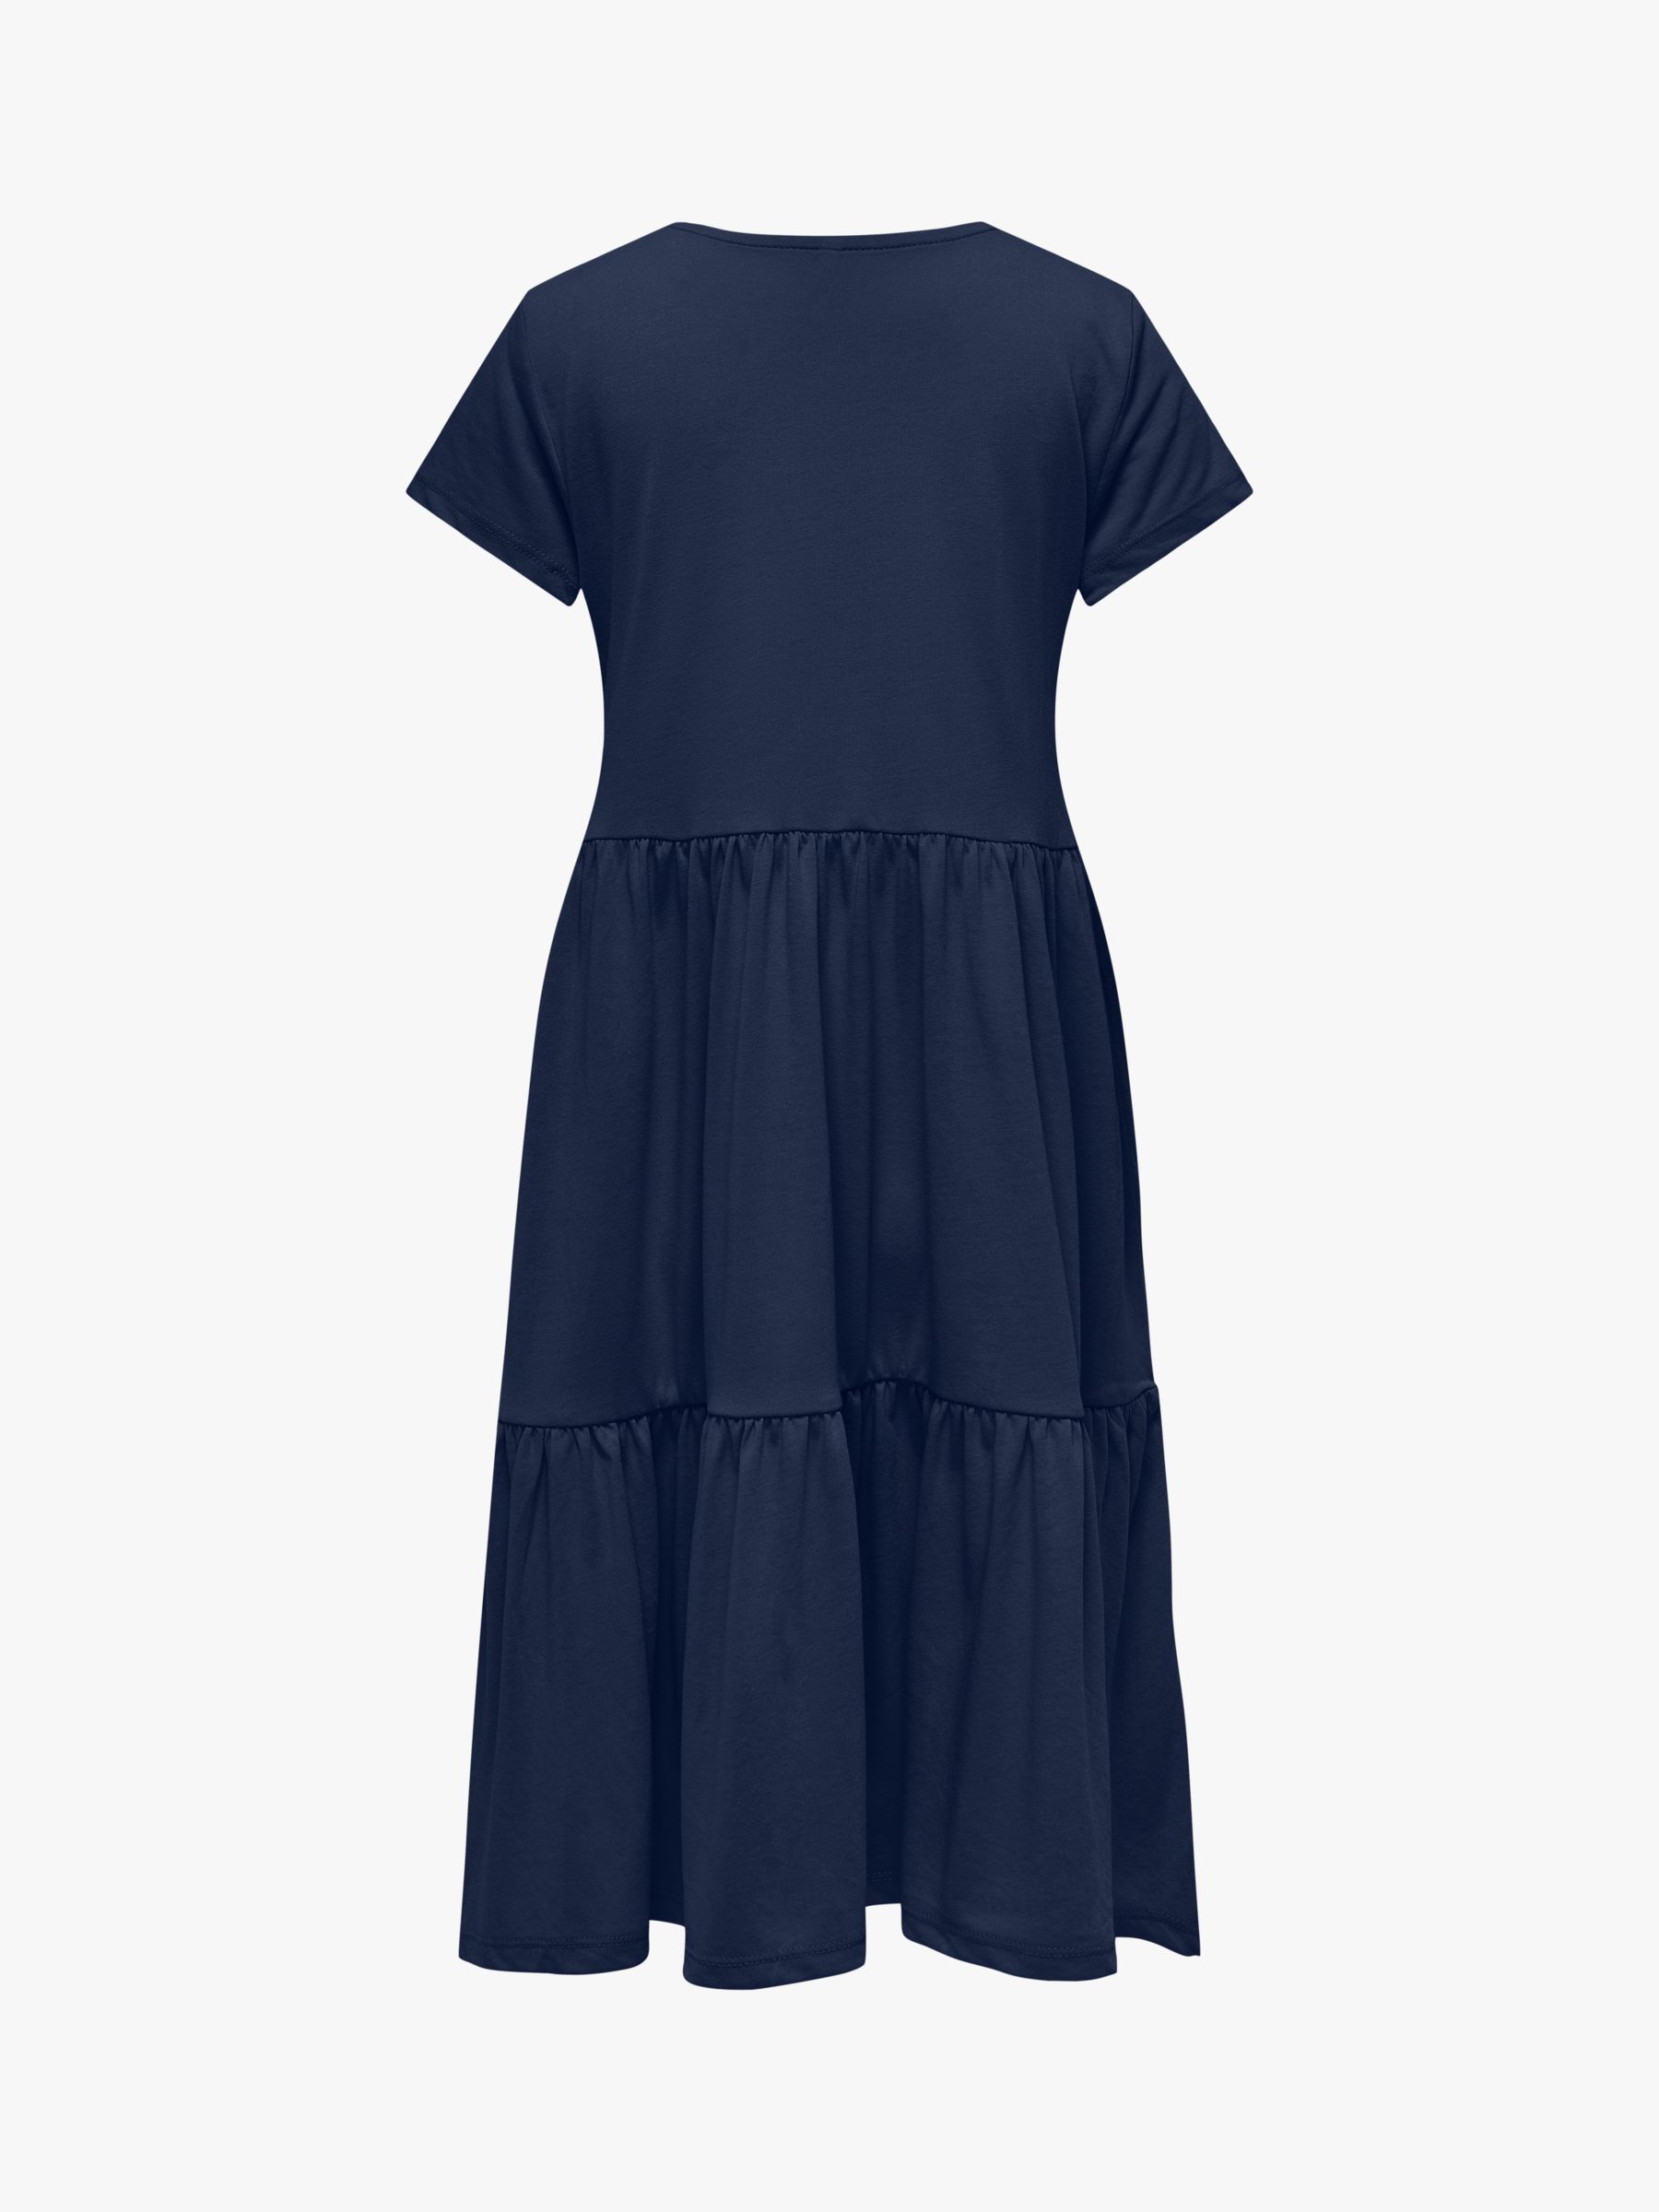 Buy Kids ONLY Kids' Long Tiered Dress, Naval Academy Online at johnlewis.com